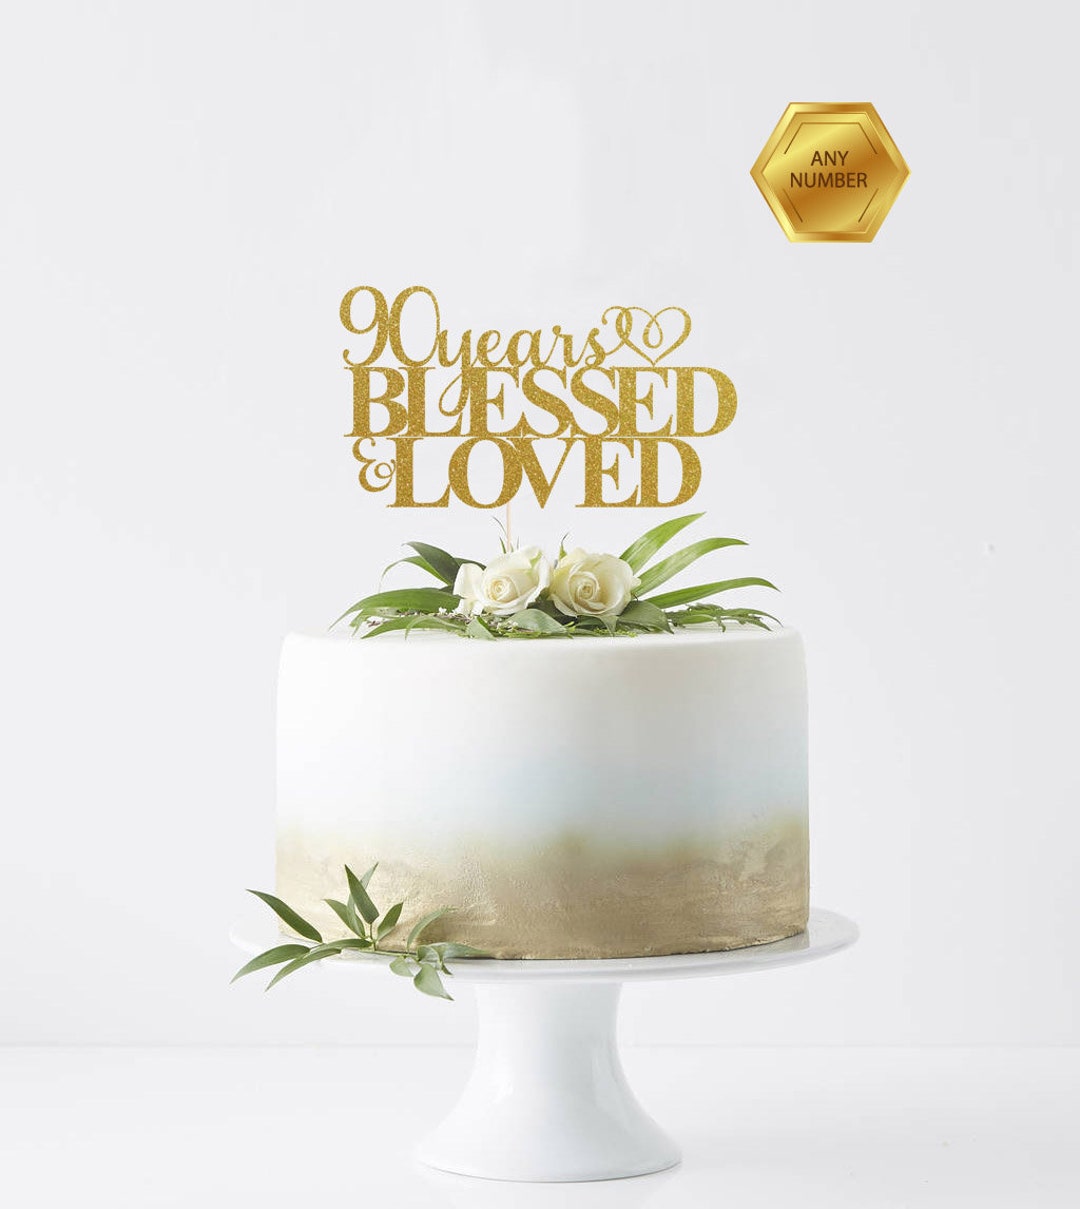 90 Years Blessed & Loved 90th Birthday Cake Topper Happy - Etsy Canada